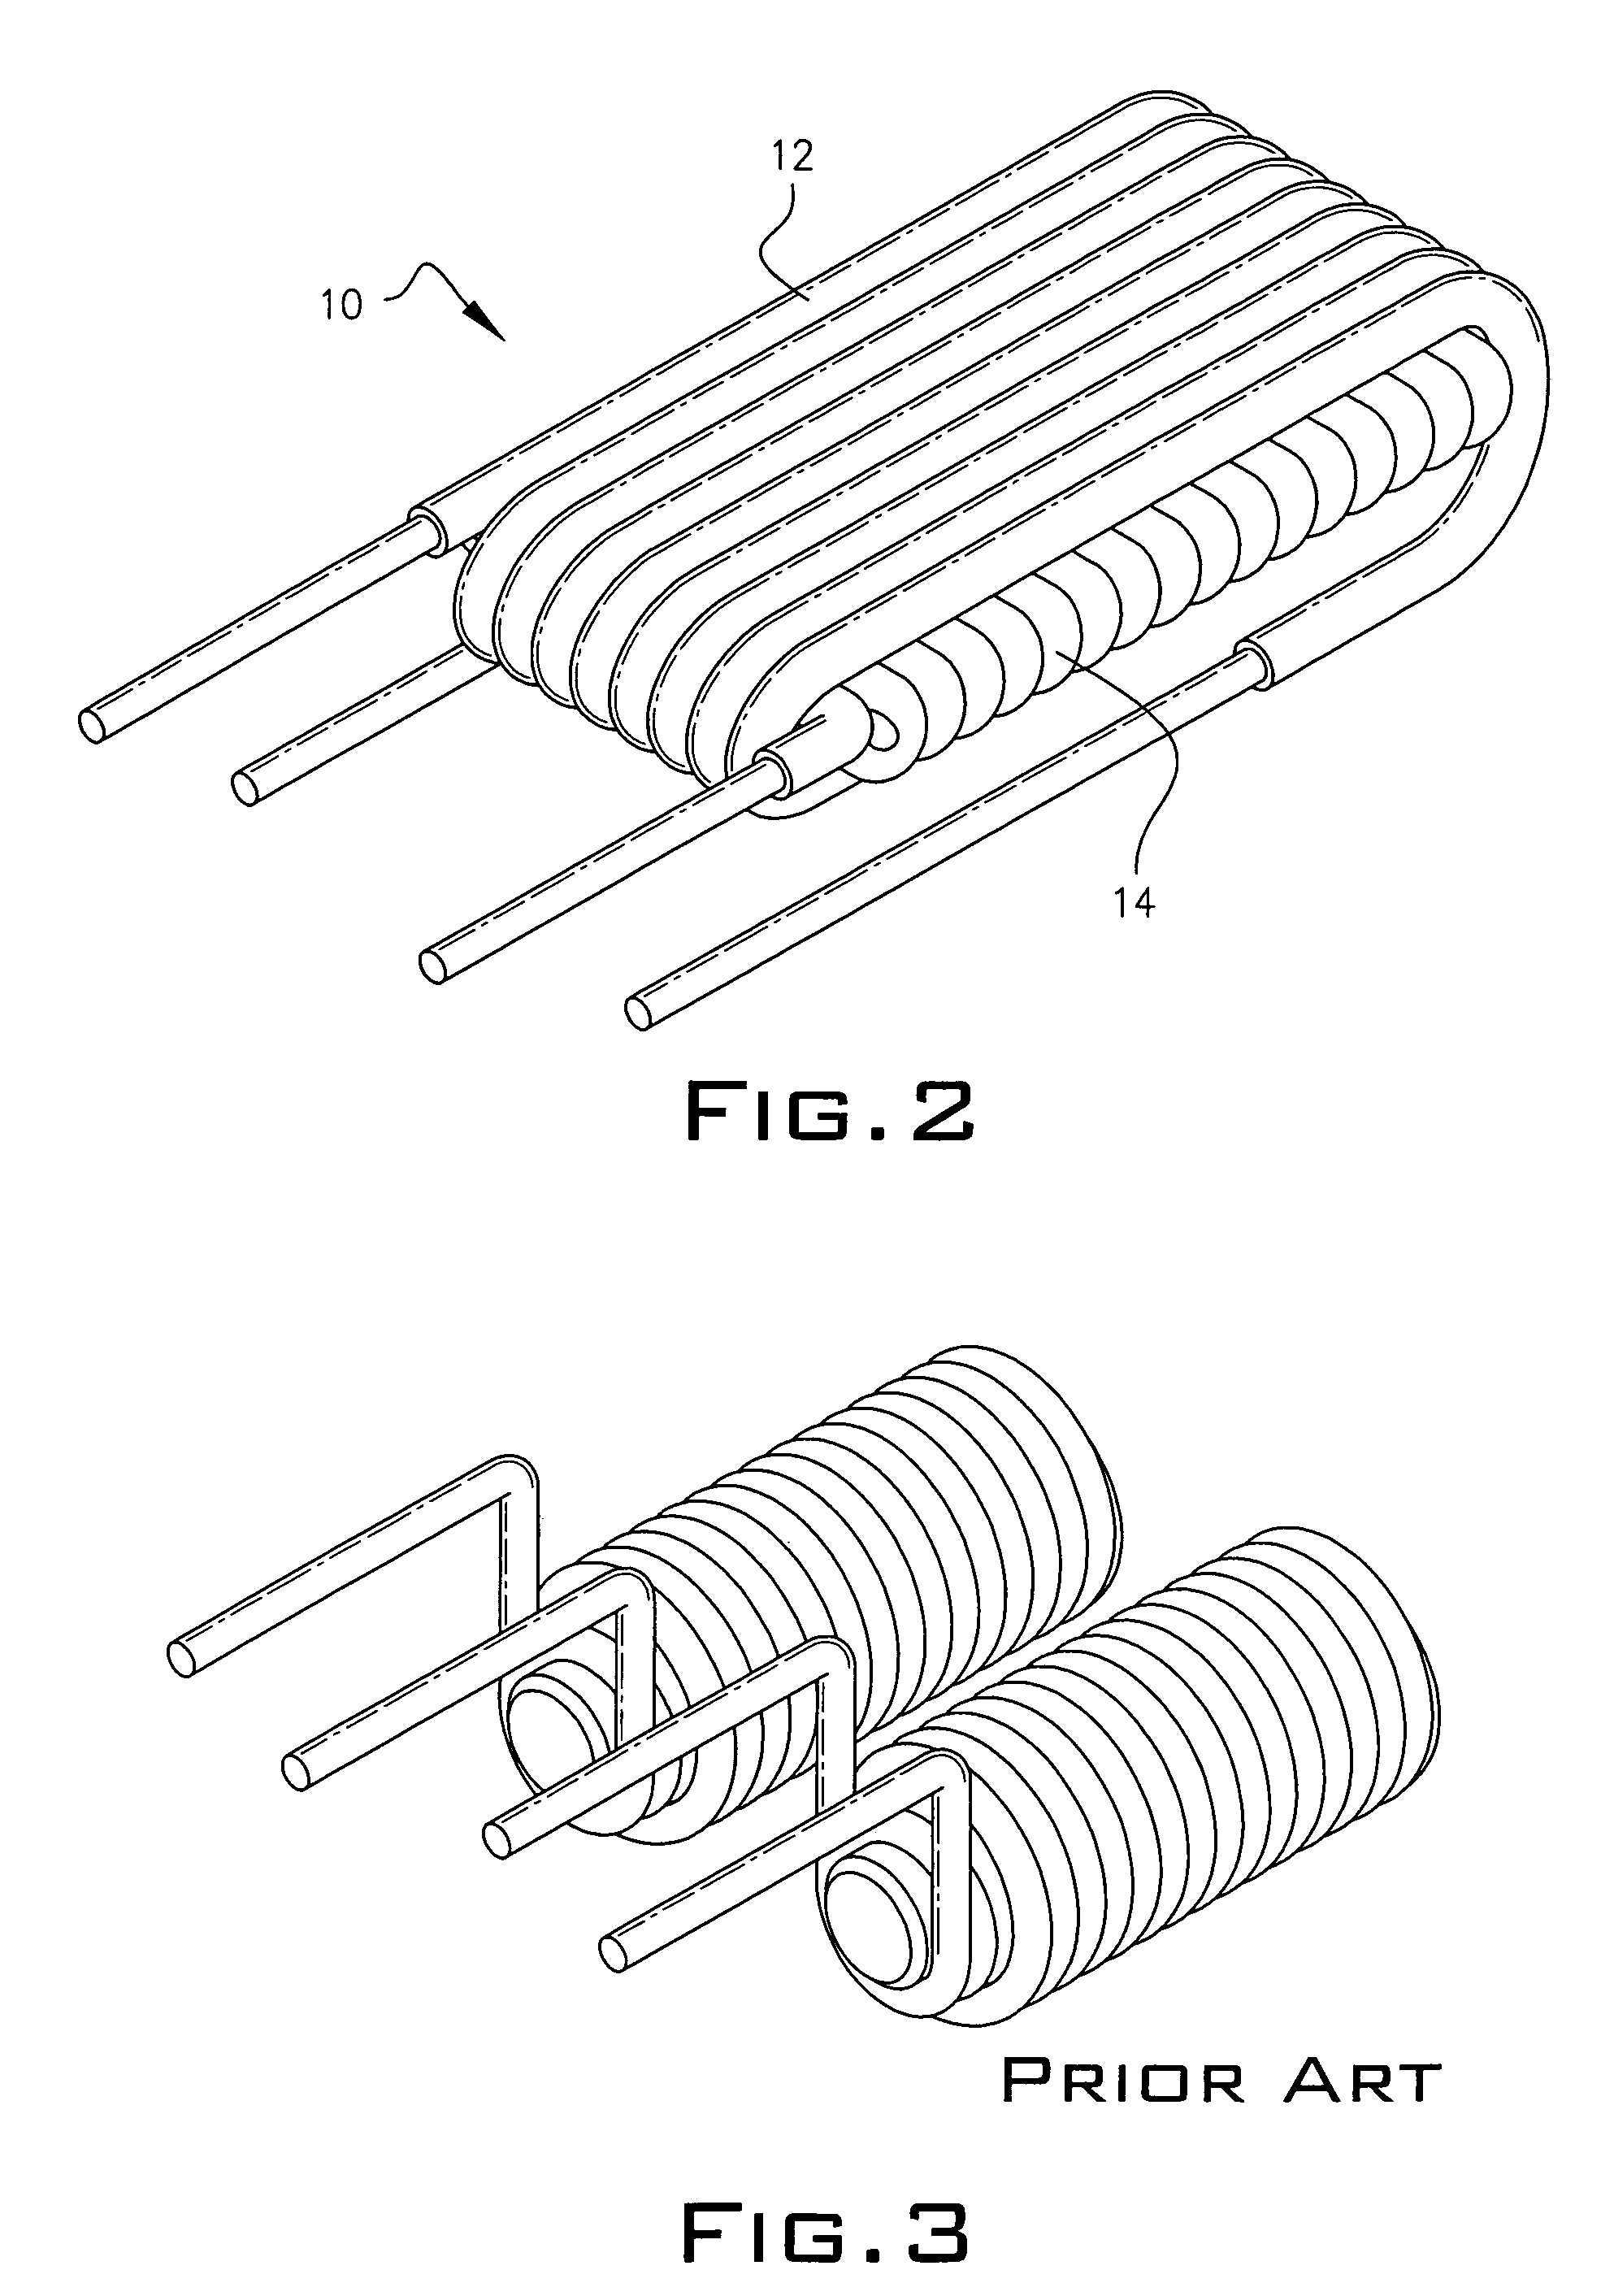 Non-ferrous surge biasing coil having multiple pairs of coils positioned at angles to one another